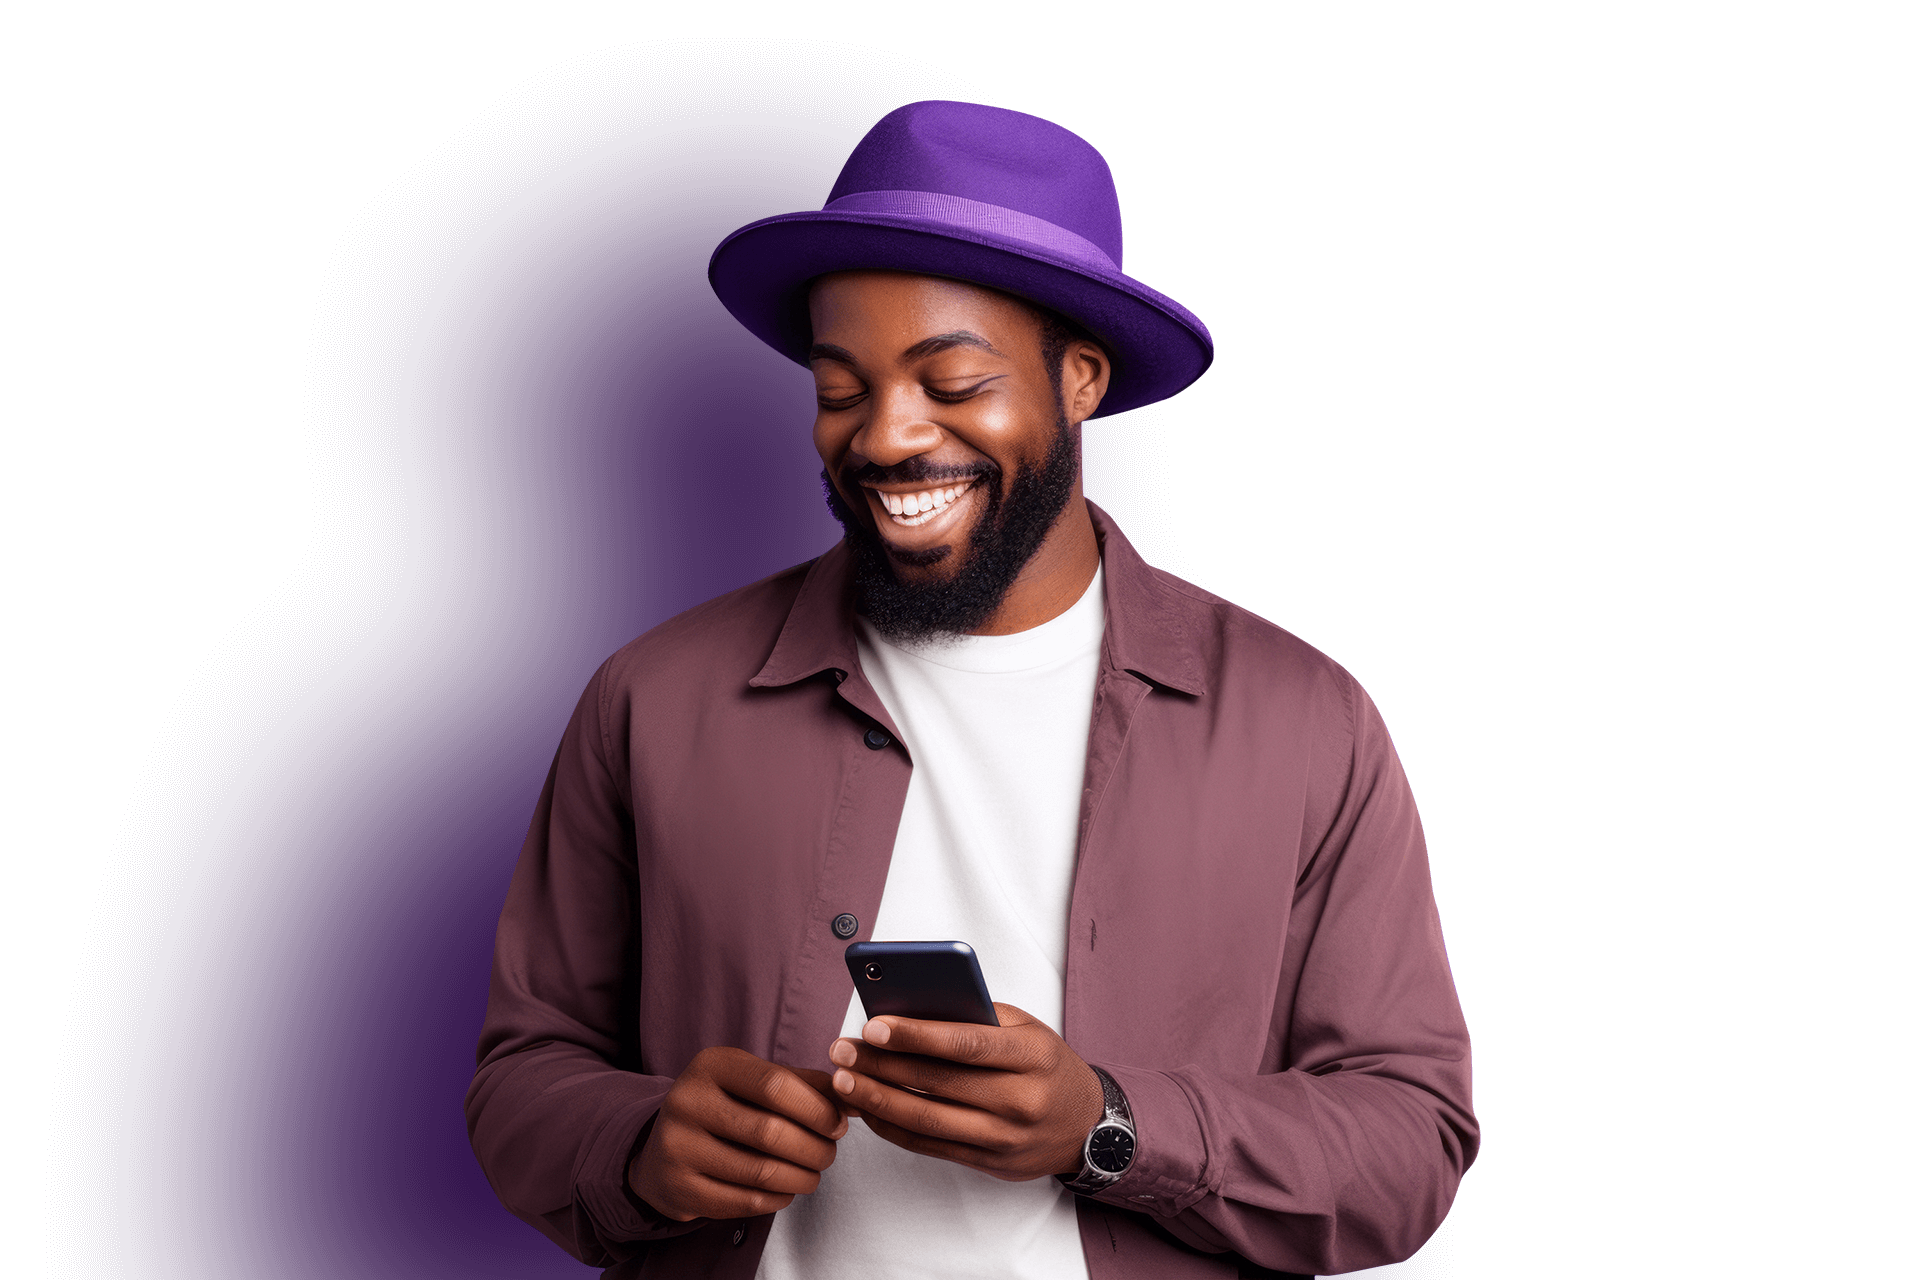 Smiling man holding a phone